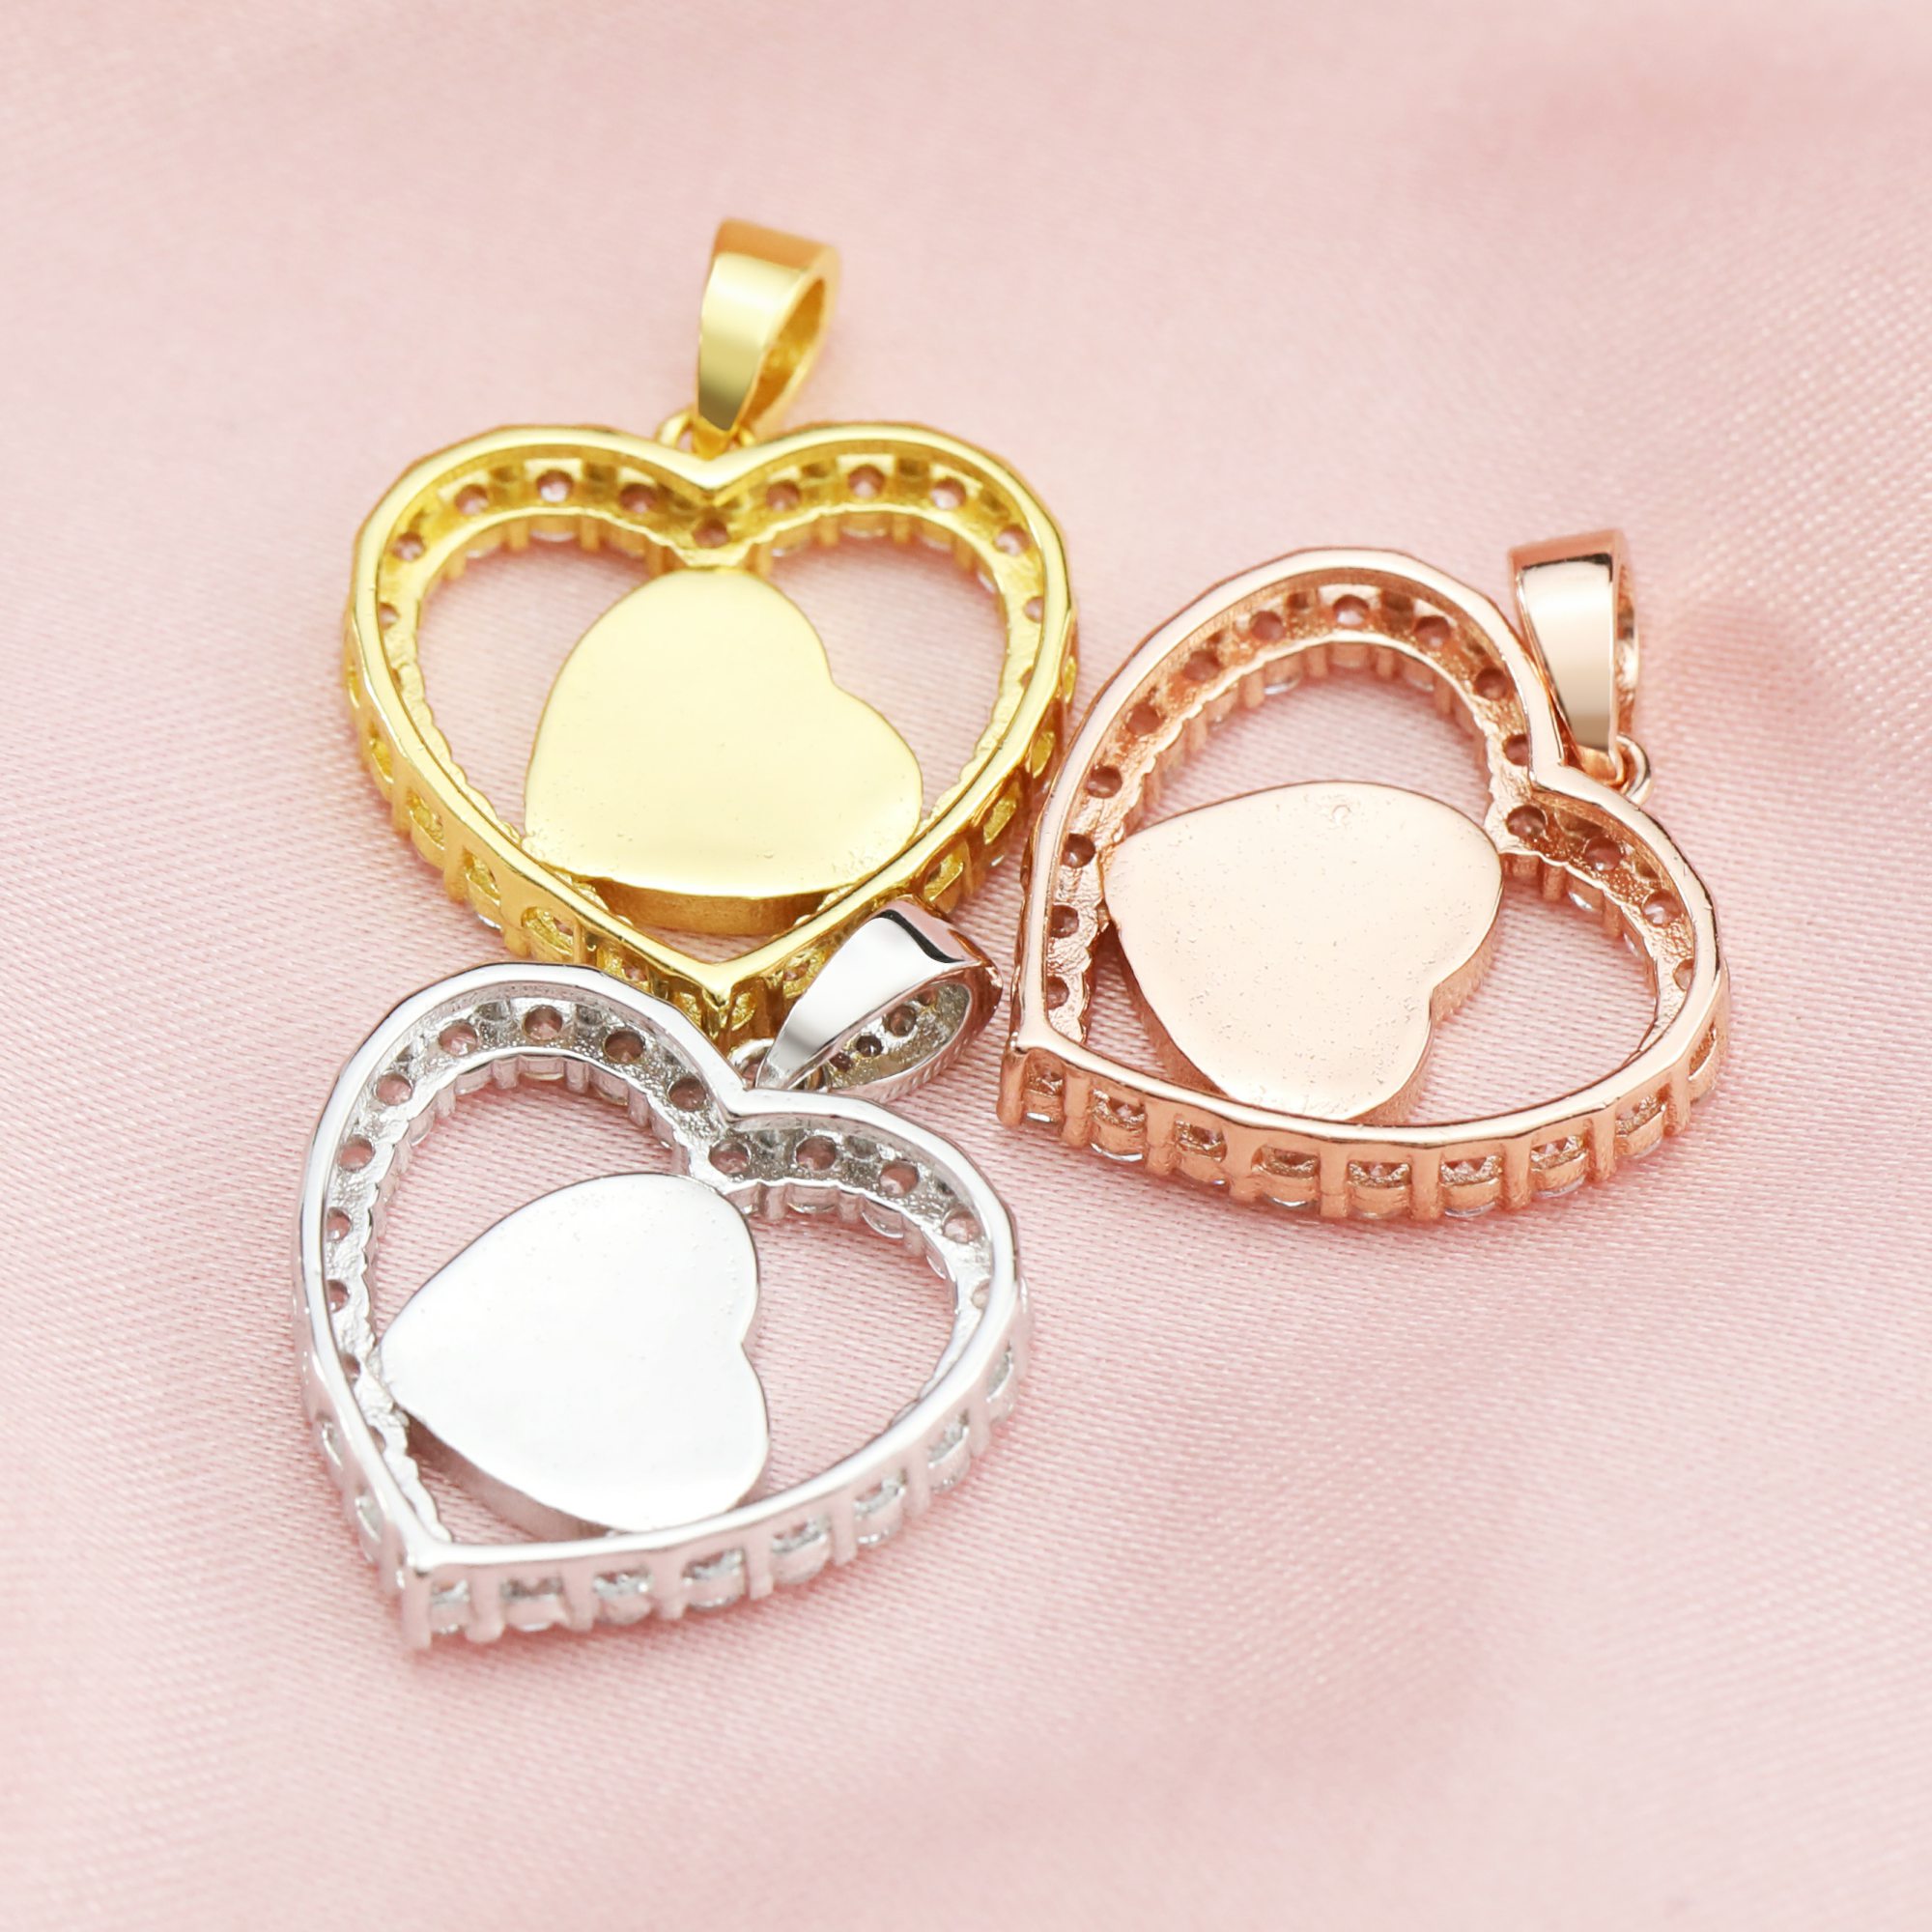 Keepsake Breast Milk Bezel 8MM Heart Pendant Settings Halo Solid 14K/18K Gold Charm Moissanite Accents DIY Memory Jewelry Supplies 1431132-1 - Click Image to Close